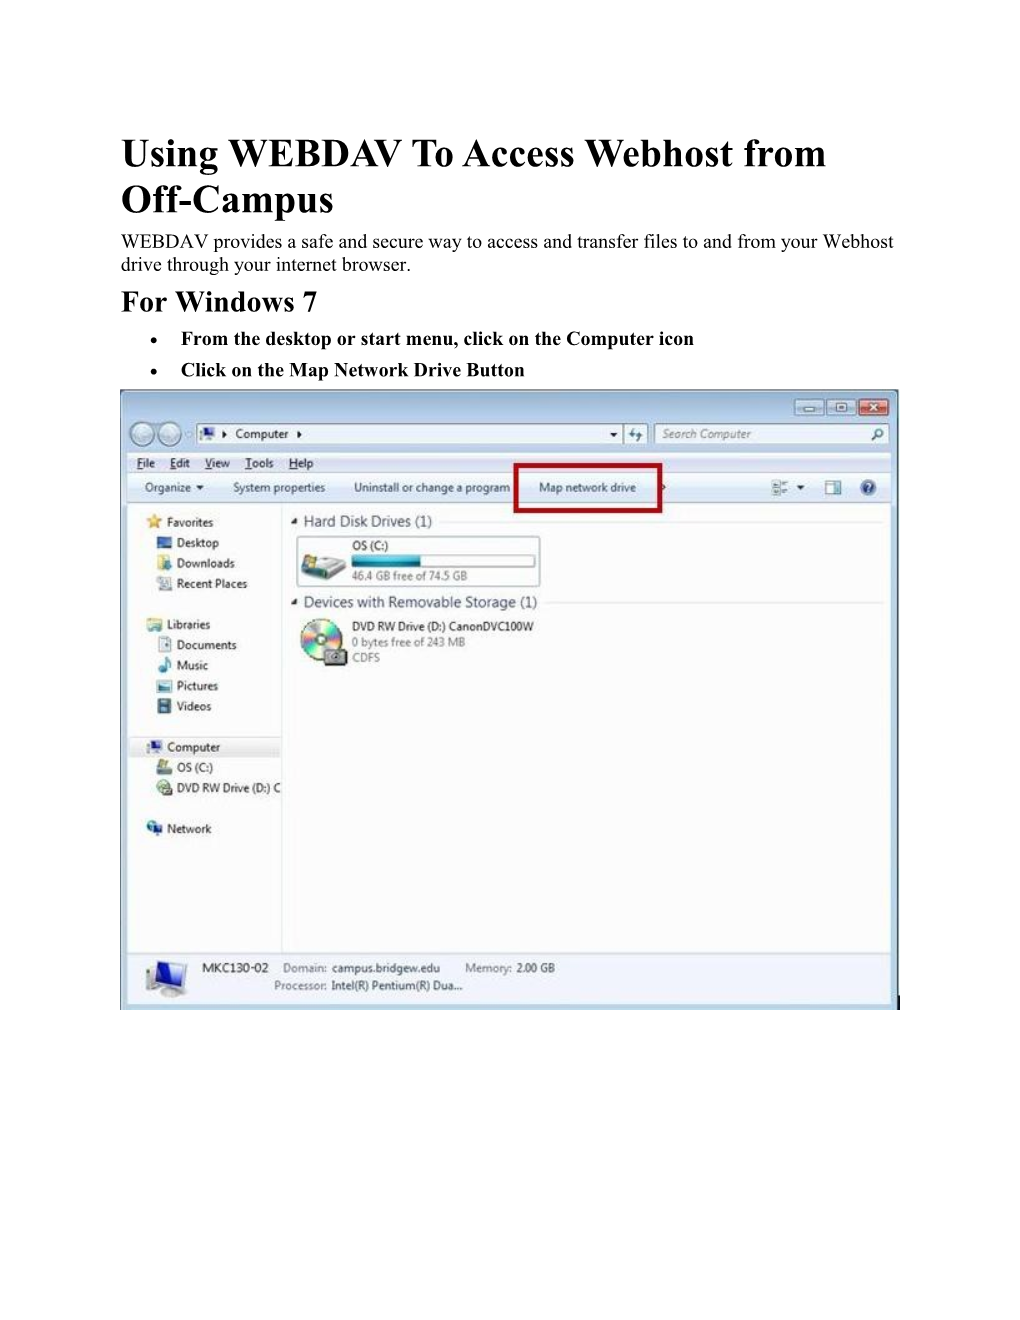 Using WEBDAV to Access Webhost from Off-Campus